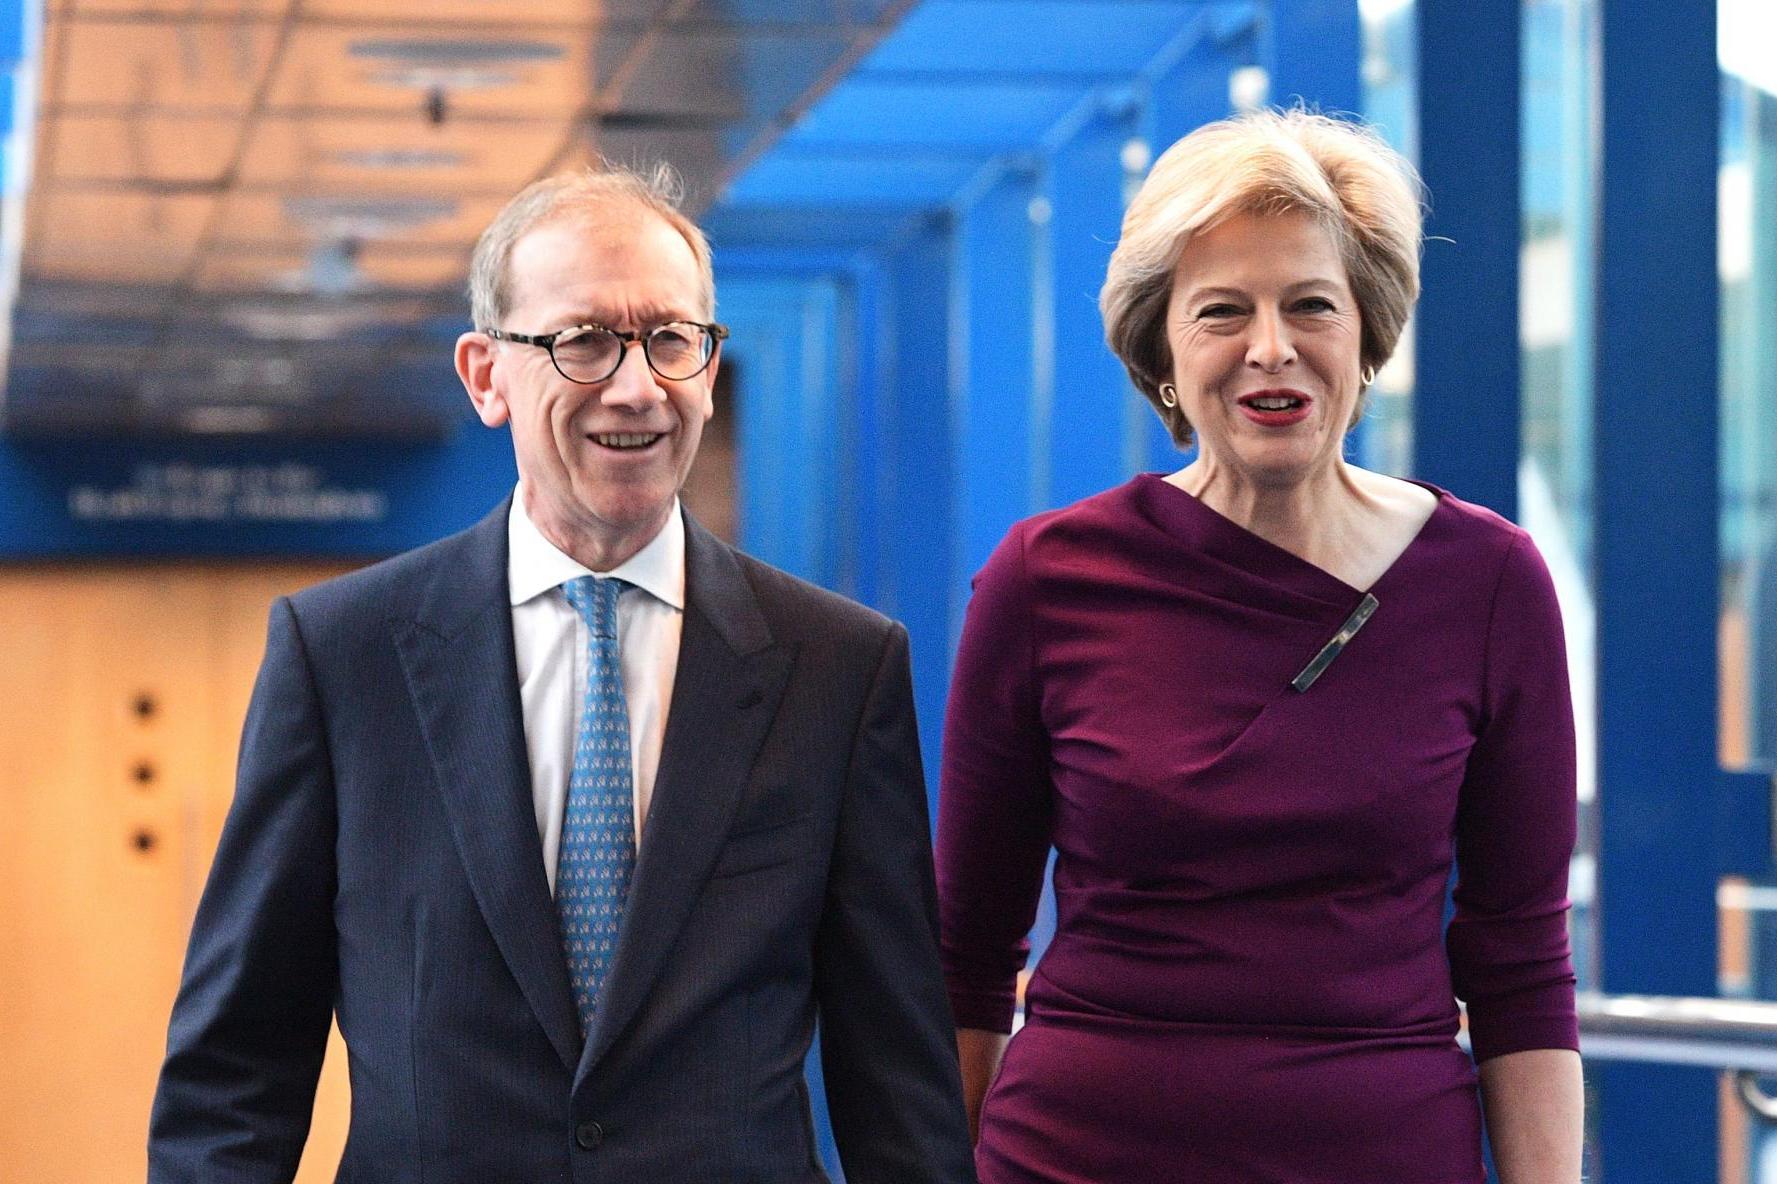 No 10 is refusing to reveal what brand the prime minister's spouse wore